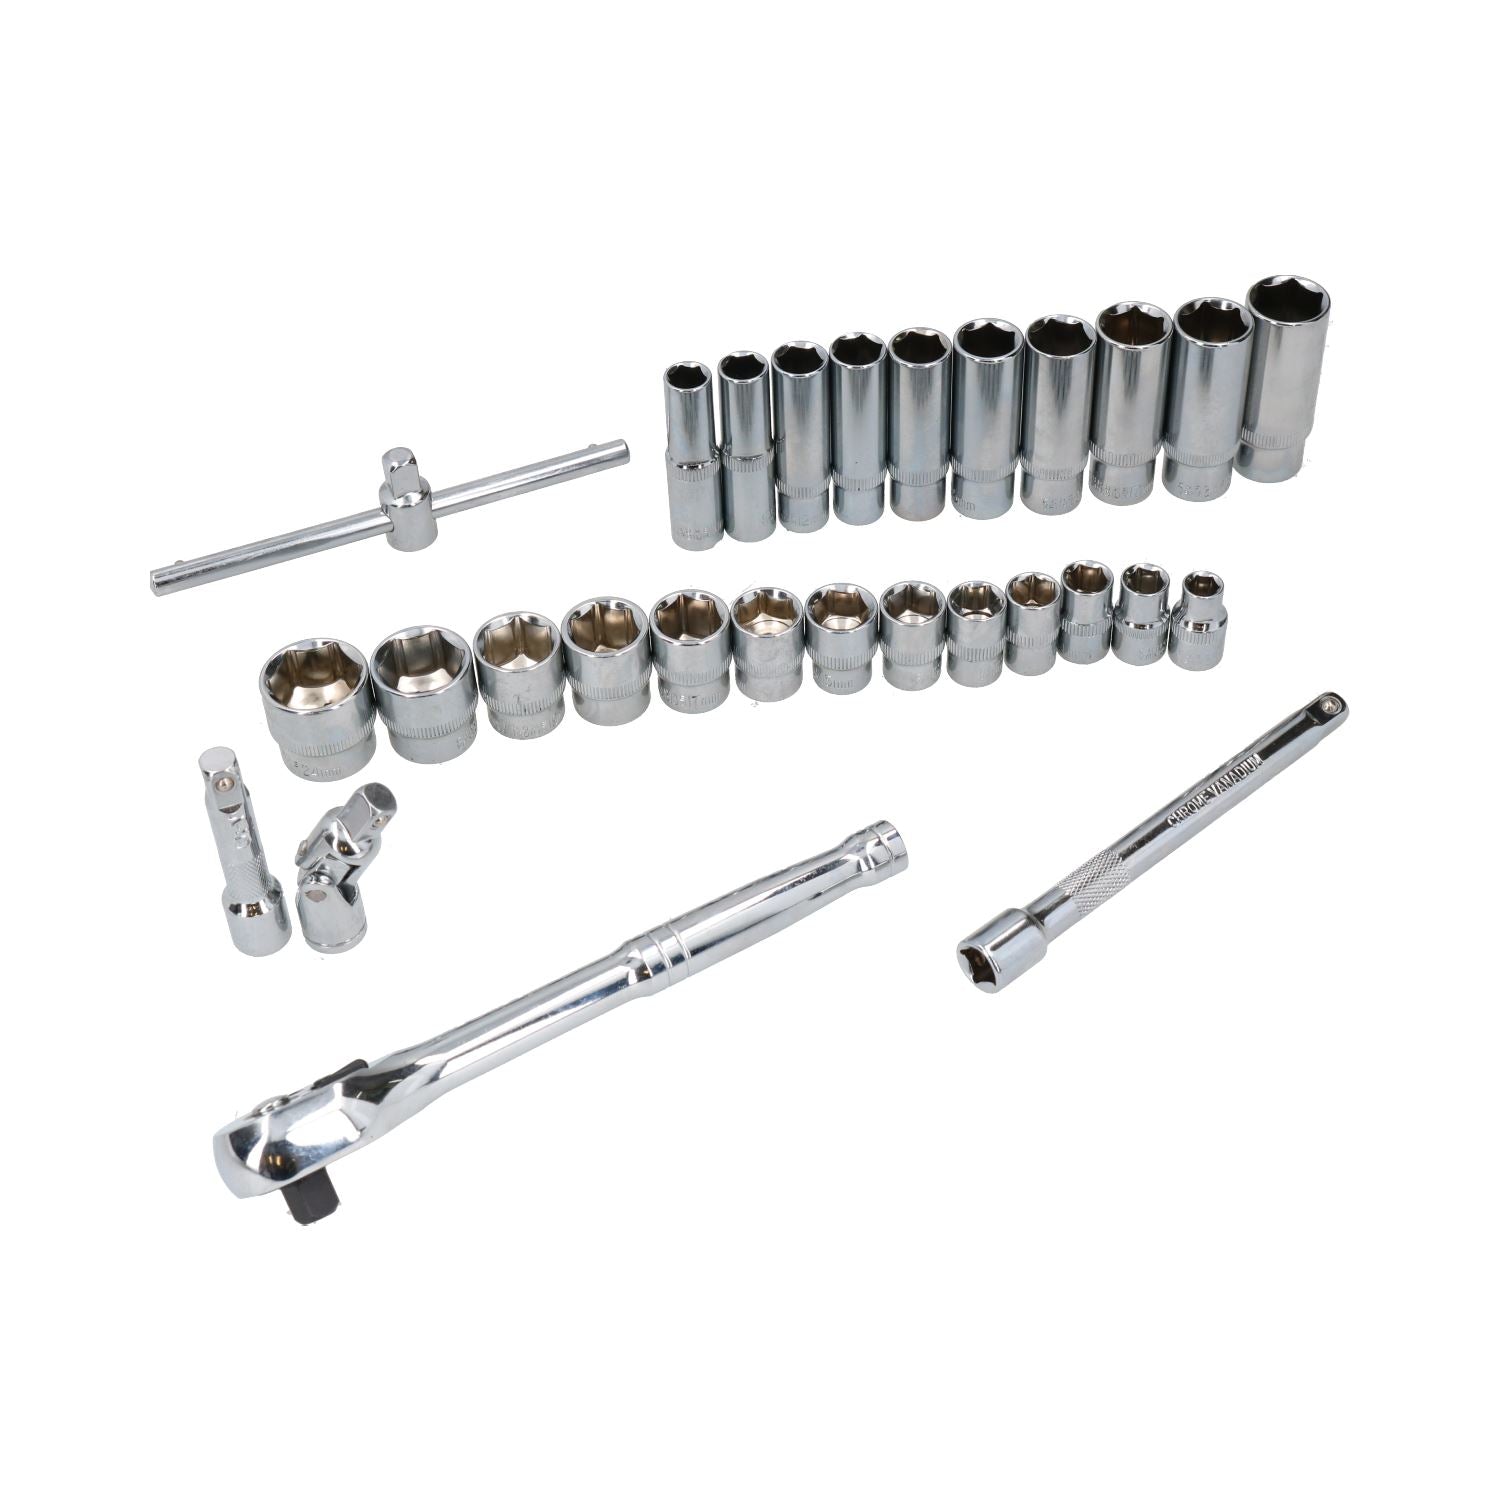 28pc 3/8" Drive Metric MM Shallow + Deep Socket And Accessory Set 8 – 24mm